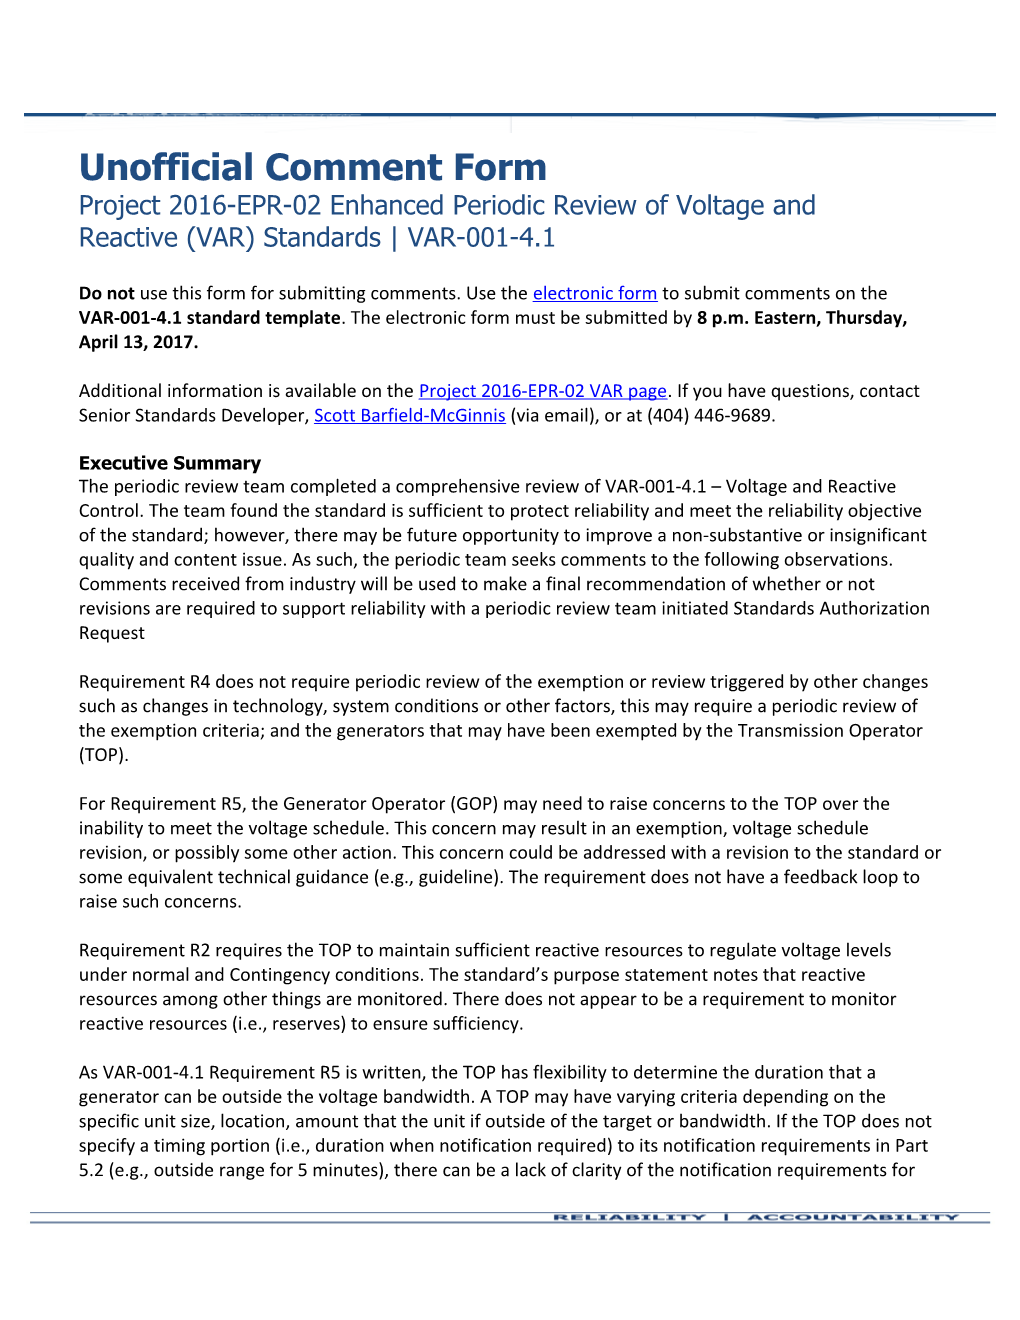 Project 2016-EPR-02 Unofficial Comment Form (Template VAR-001-4.1 Draft 1)